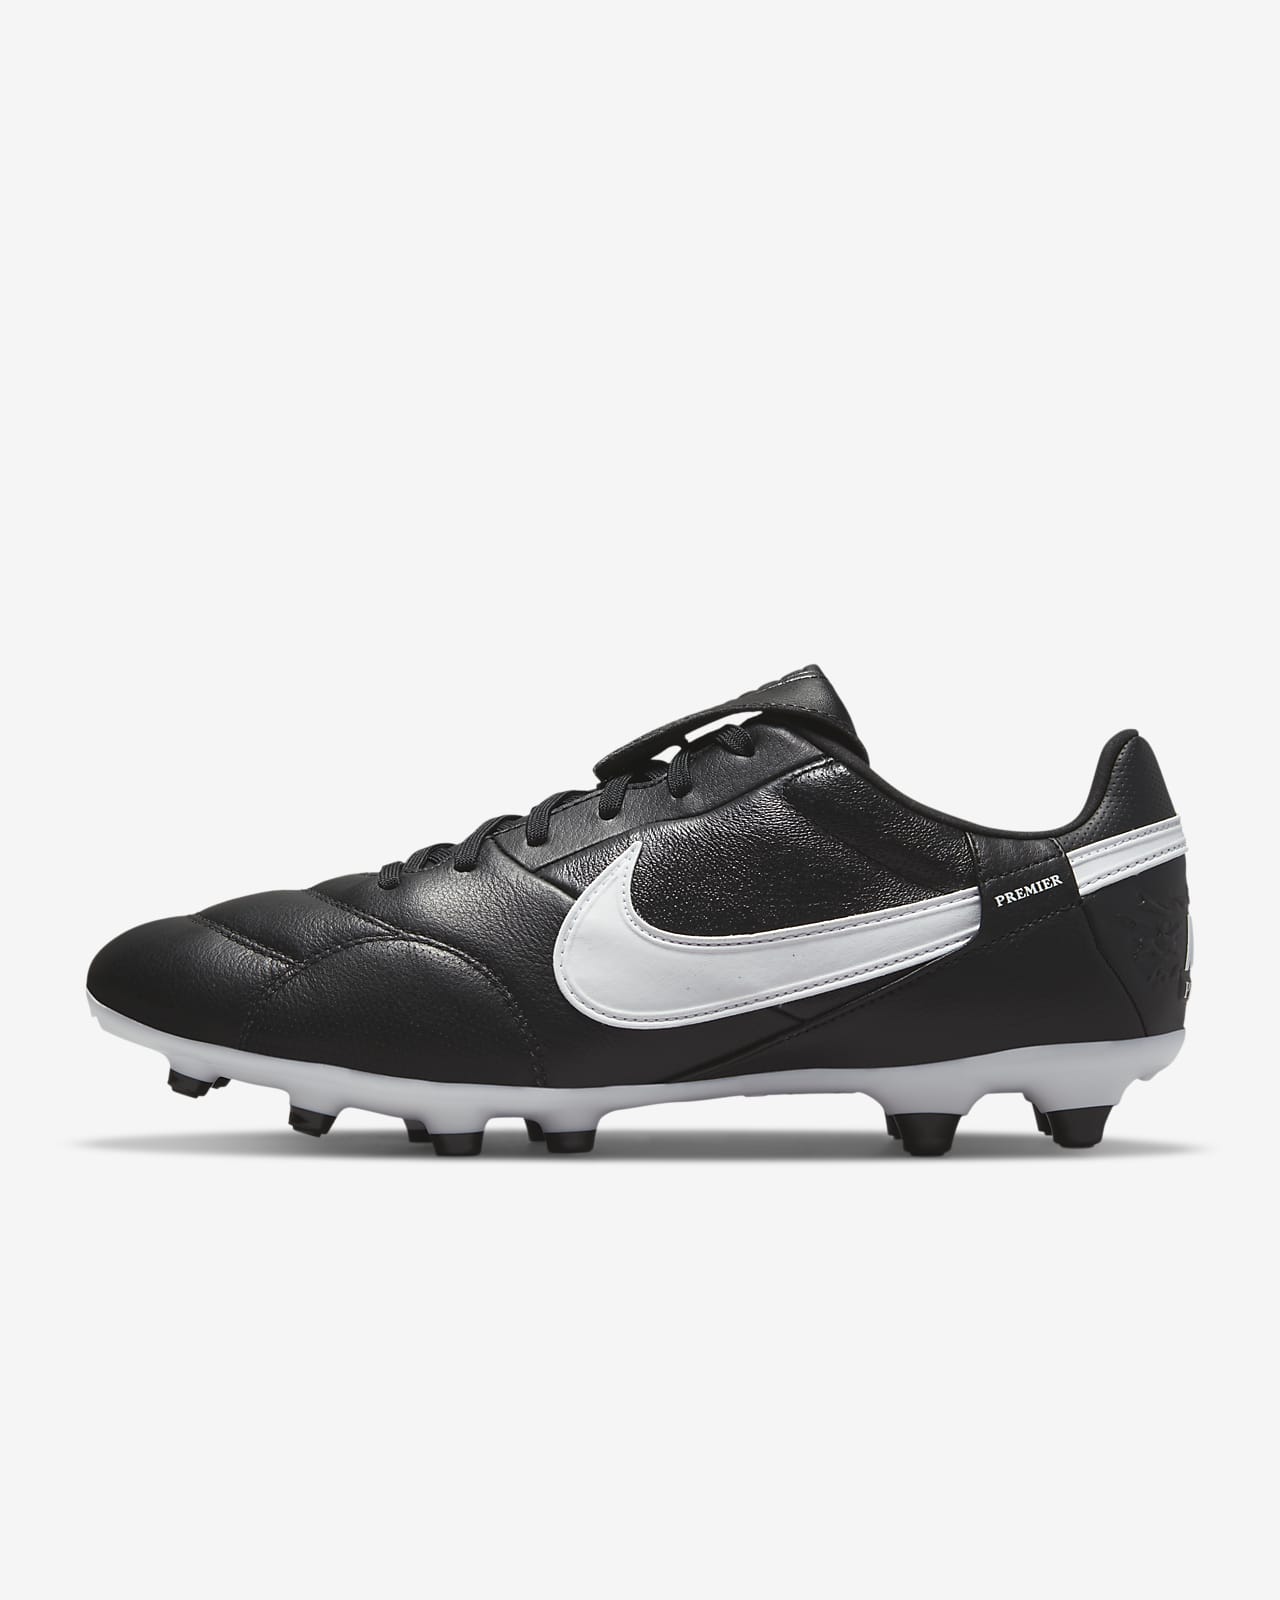 The Nike Premier 3 FG Firm-Ground Football Boots